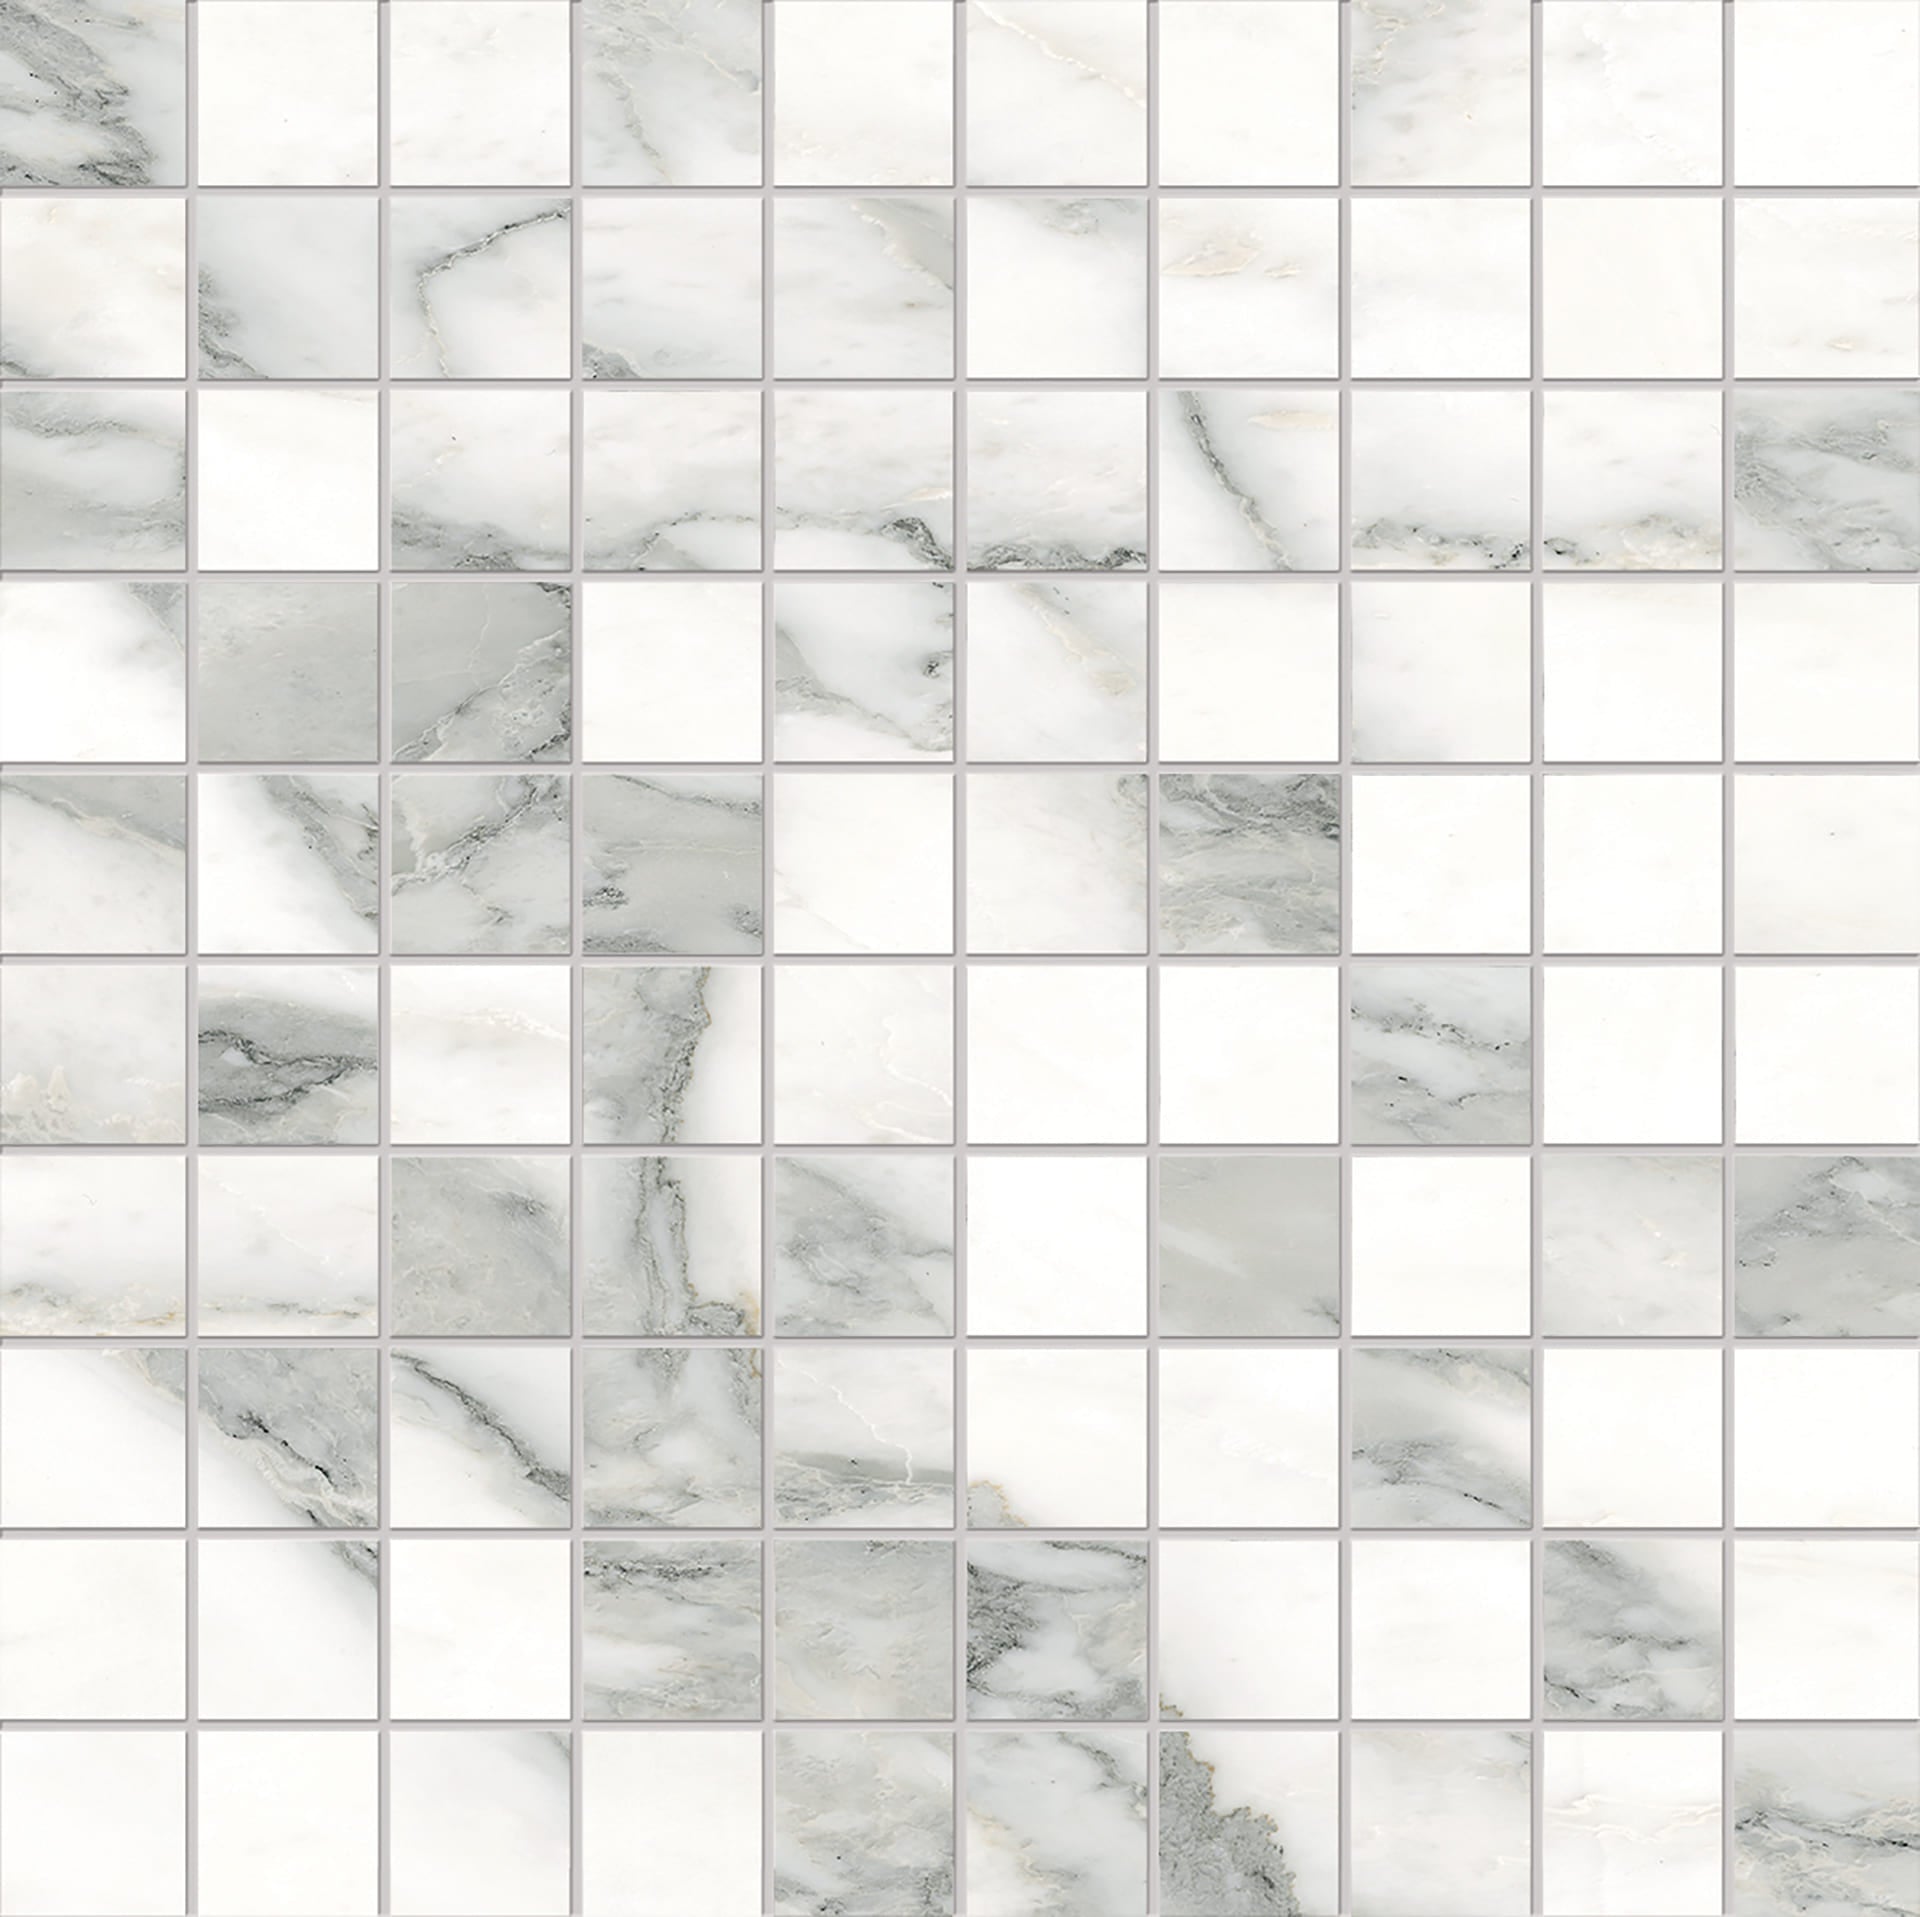 Tele Di Marmo Selection: Marble Arabescato Corchia Straight Stack 1x1 Mosaic (12"x12"x9.5-mm | glossy)